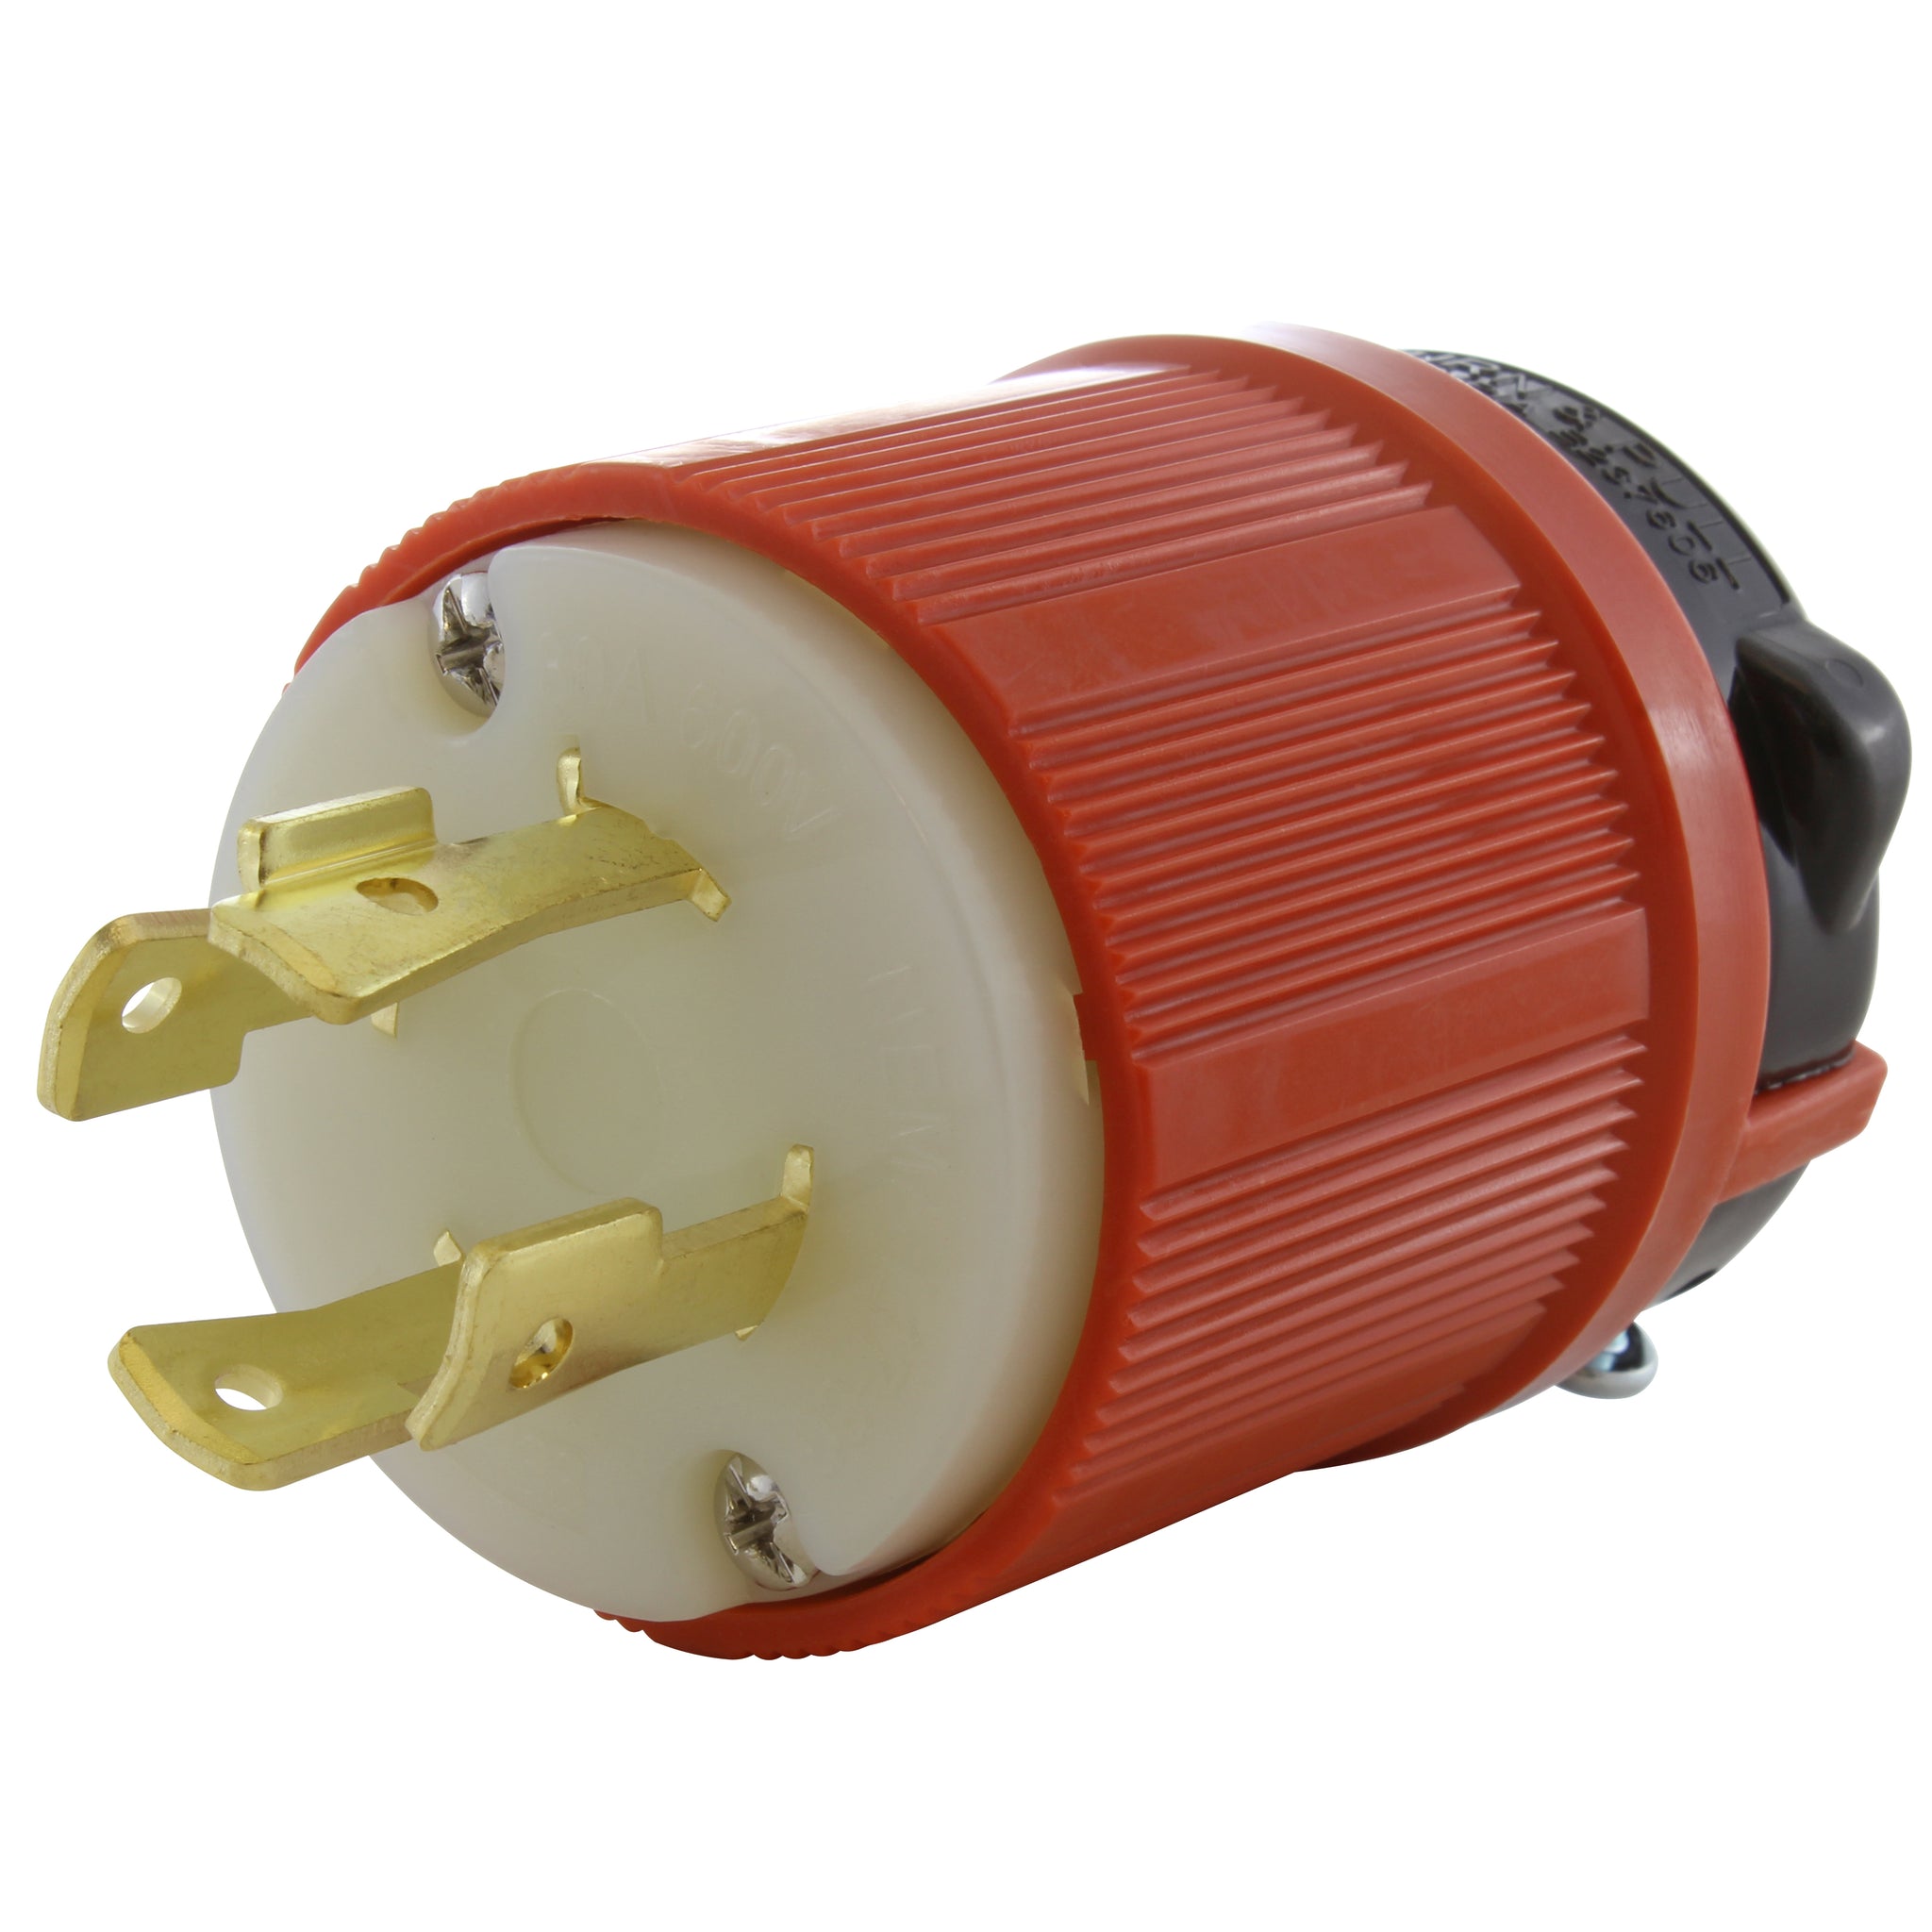 ○[SWS] Electric cable 30m spool Winding (1 reel ) [color Orange & Red]  Stripe/AVS125f-30-ORRD 